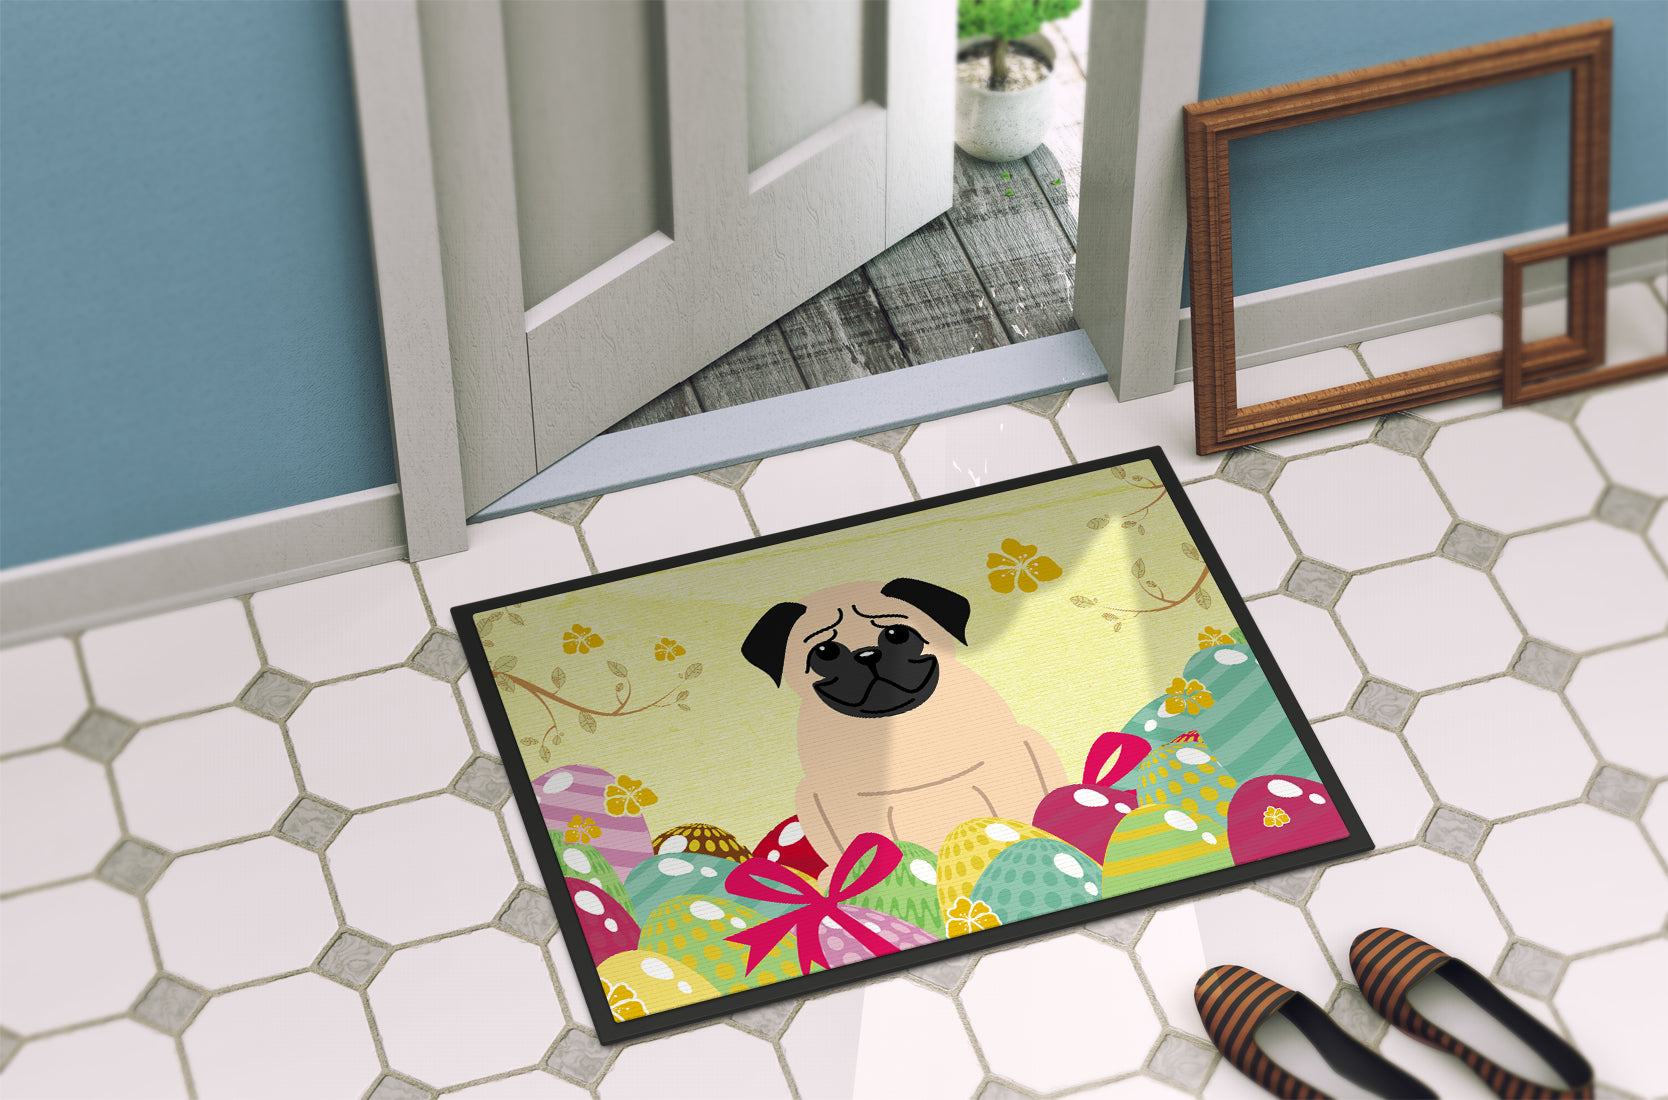 Easter Eggs Pug Fawn Indoor or Outdoor Mat 18x27 BB6008MAT - the-store.com